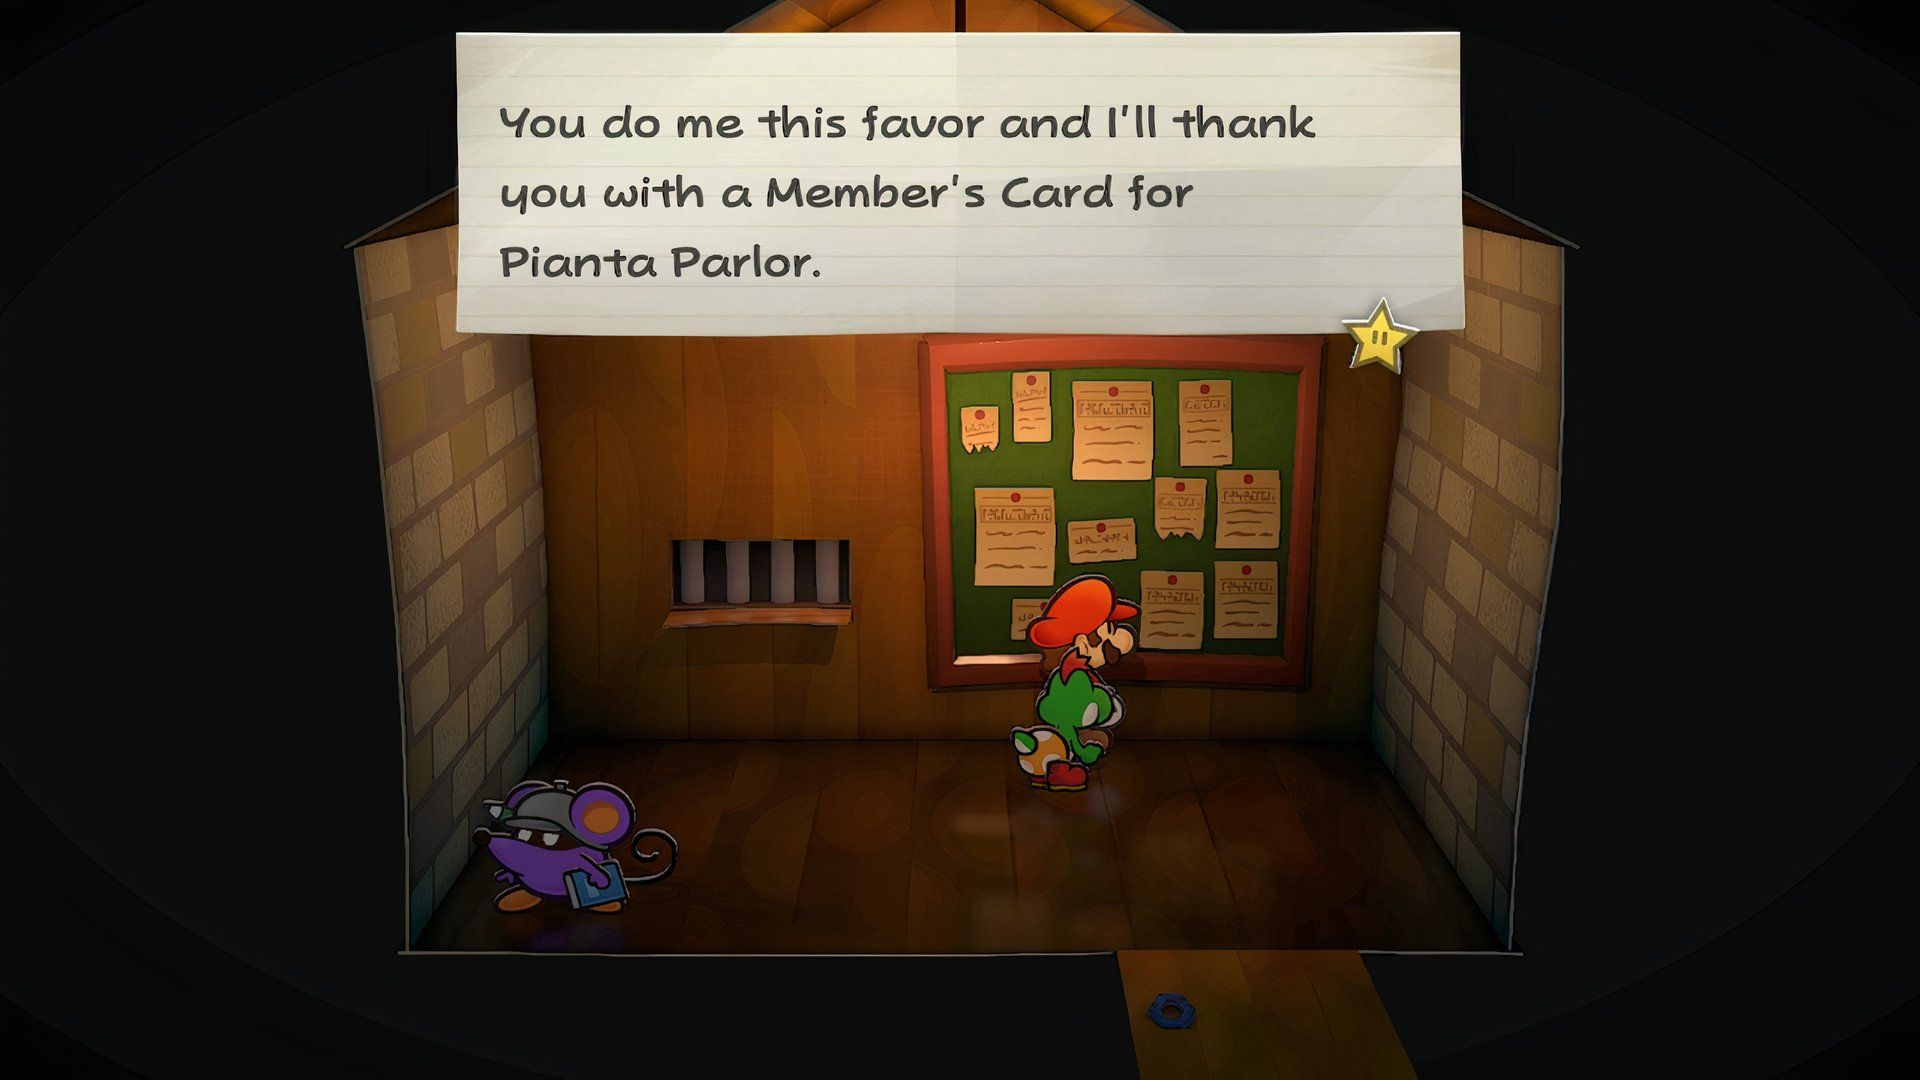 Paper Mario: The Thousand-Year Door - Trouble Center Member's Card